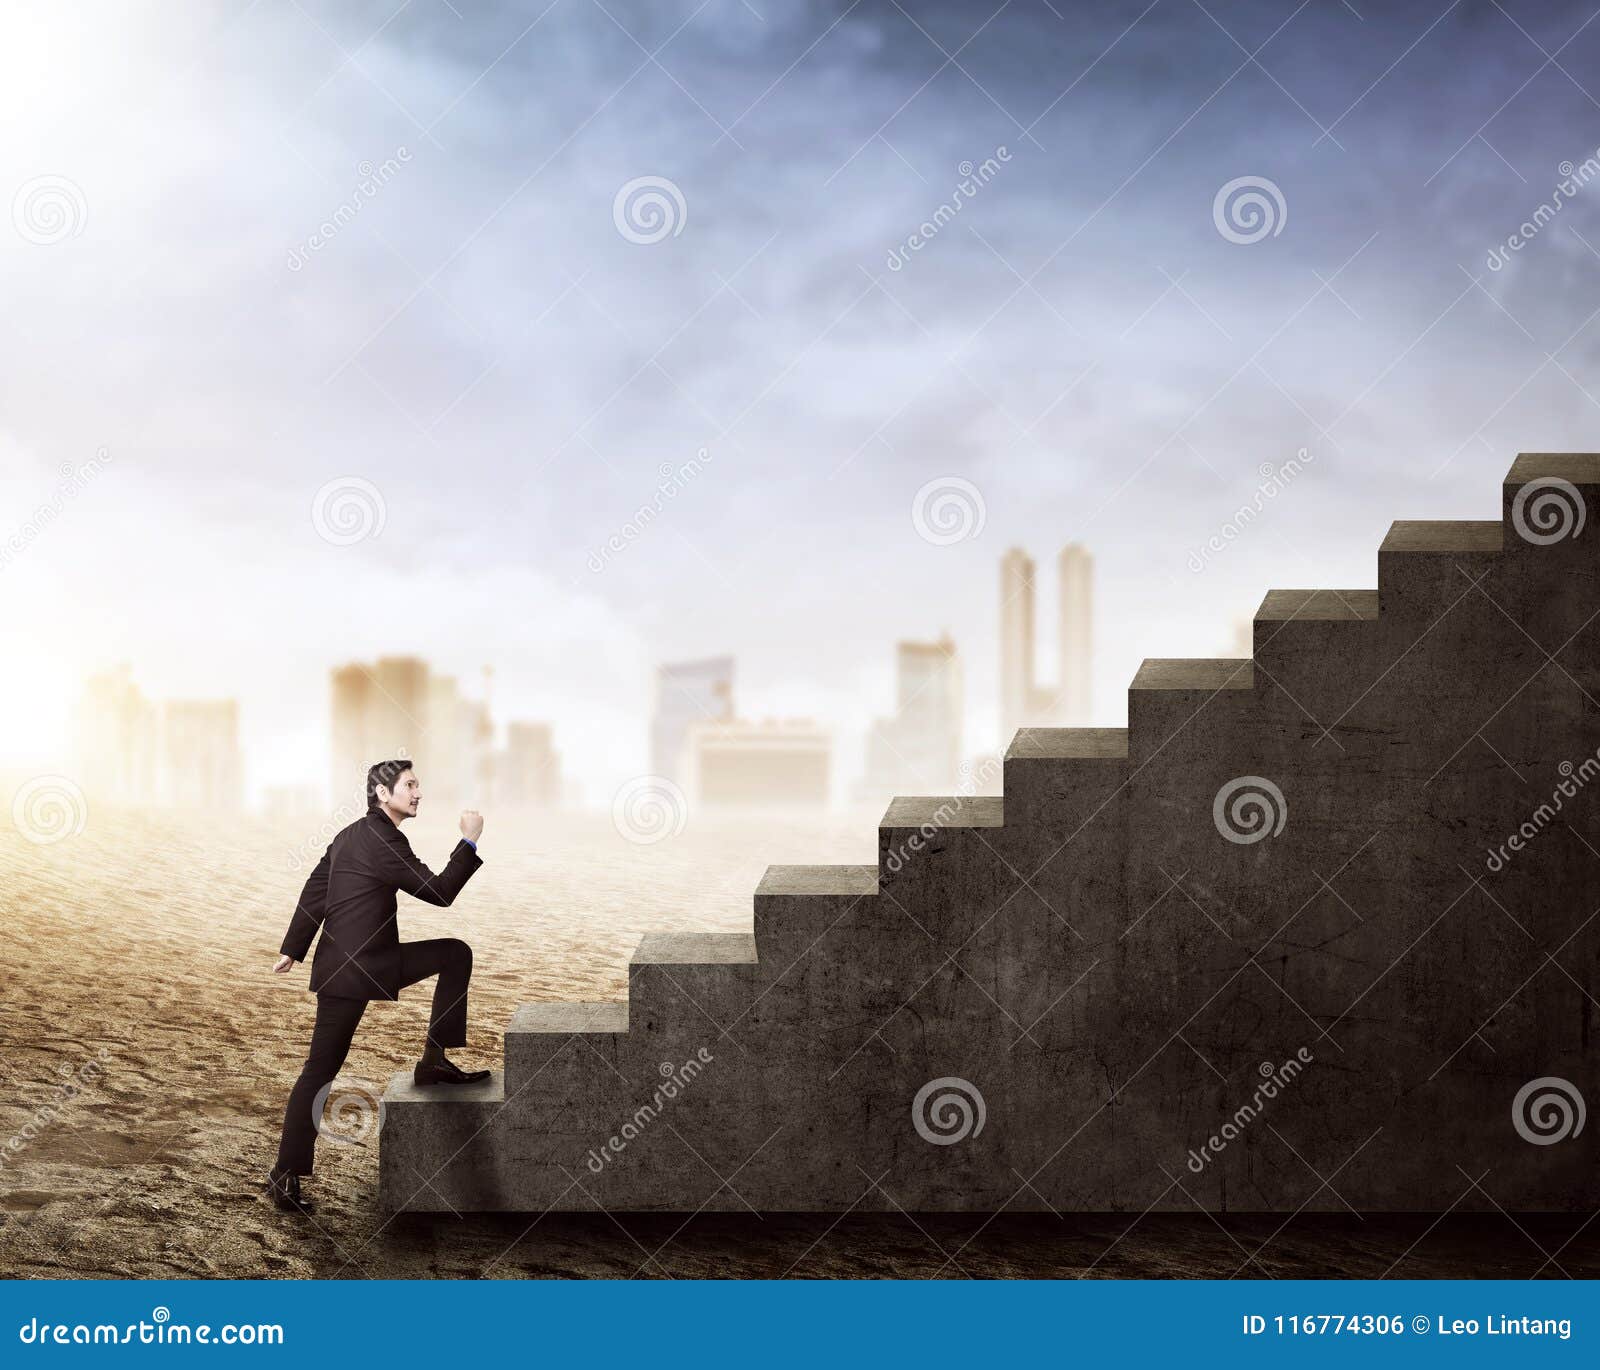 Download free photo of Stairs,rise,stair step,staircase,high - from needpix.com